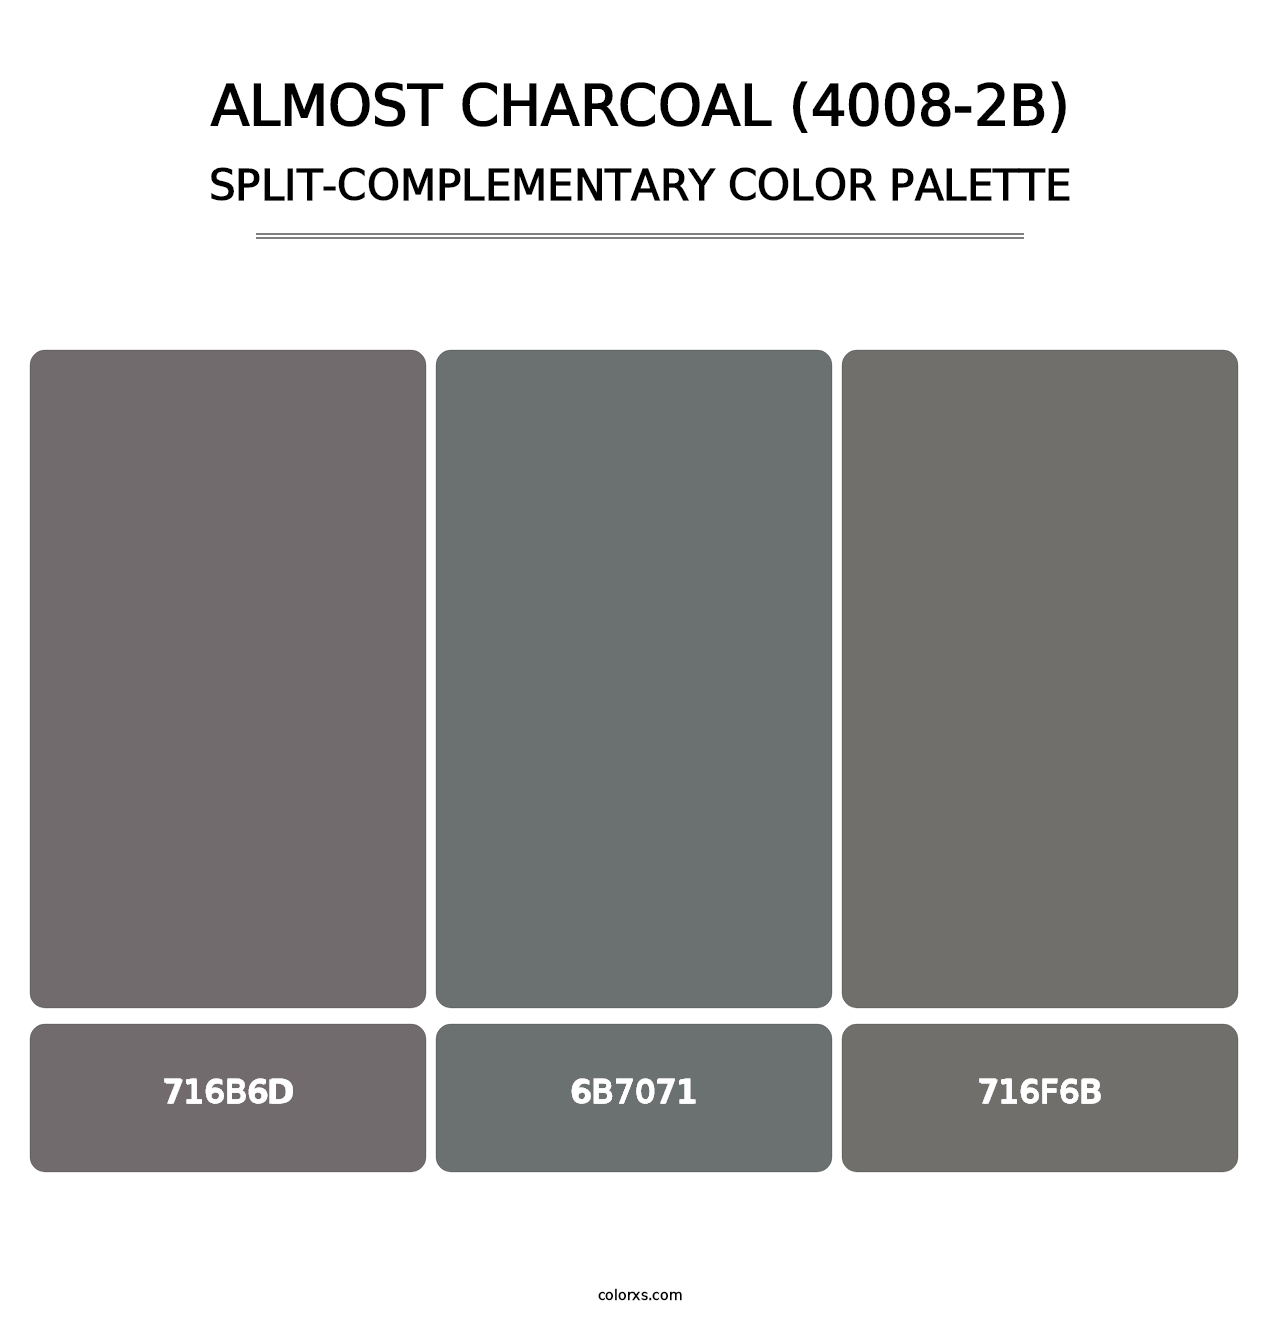 Almost Charcoal (4008-2B) - Split-Complementary Color Palette